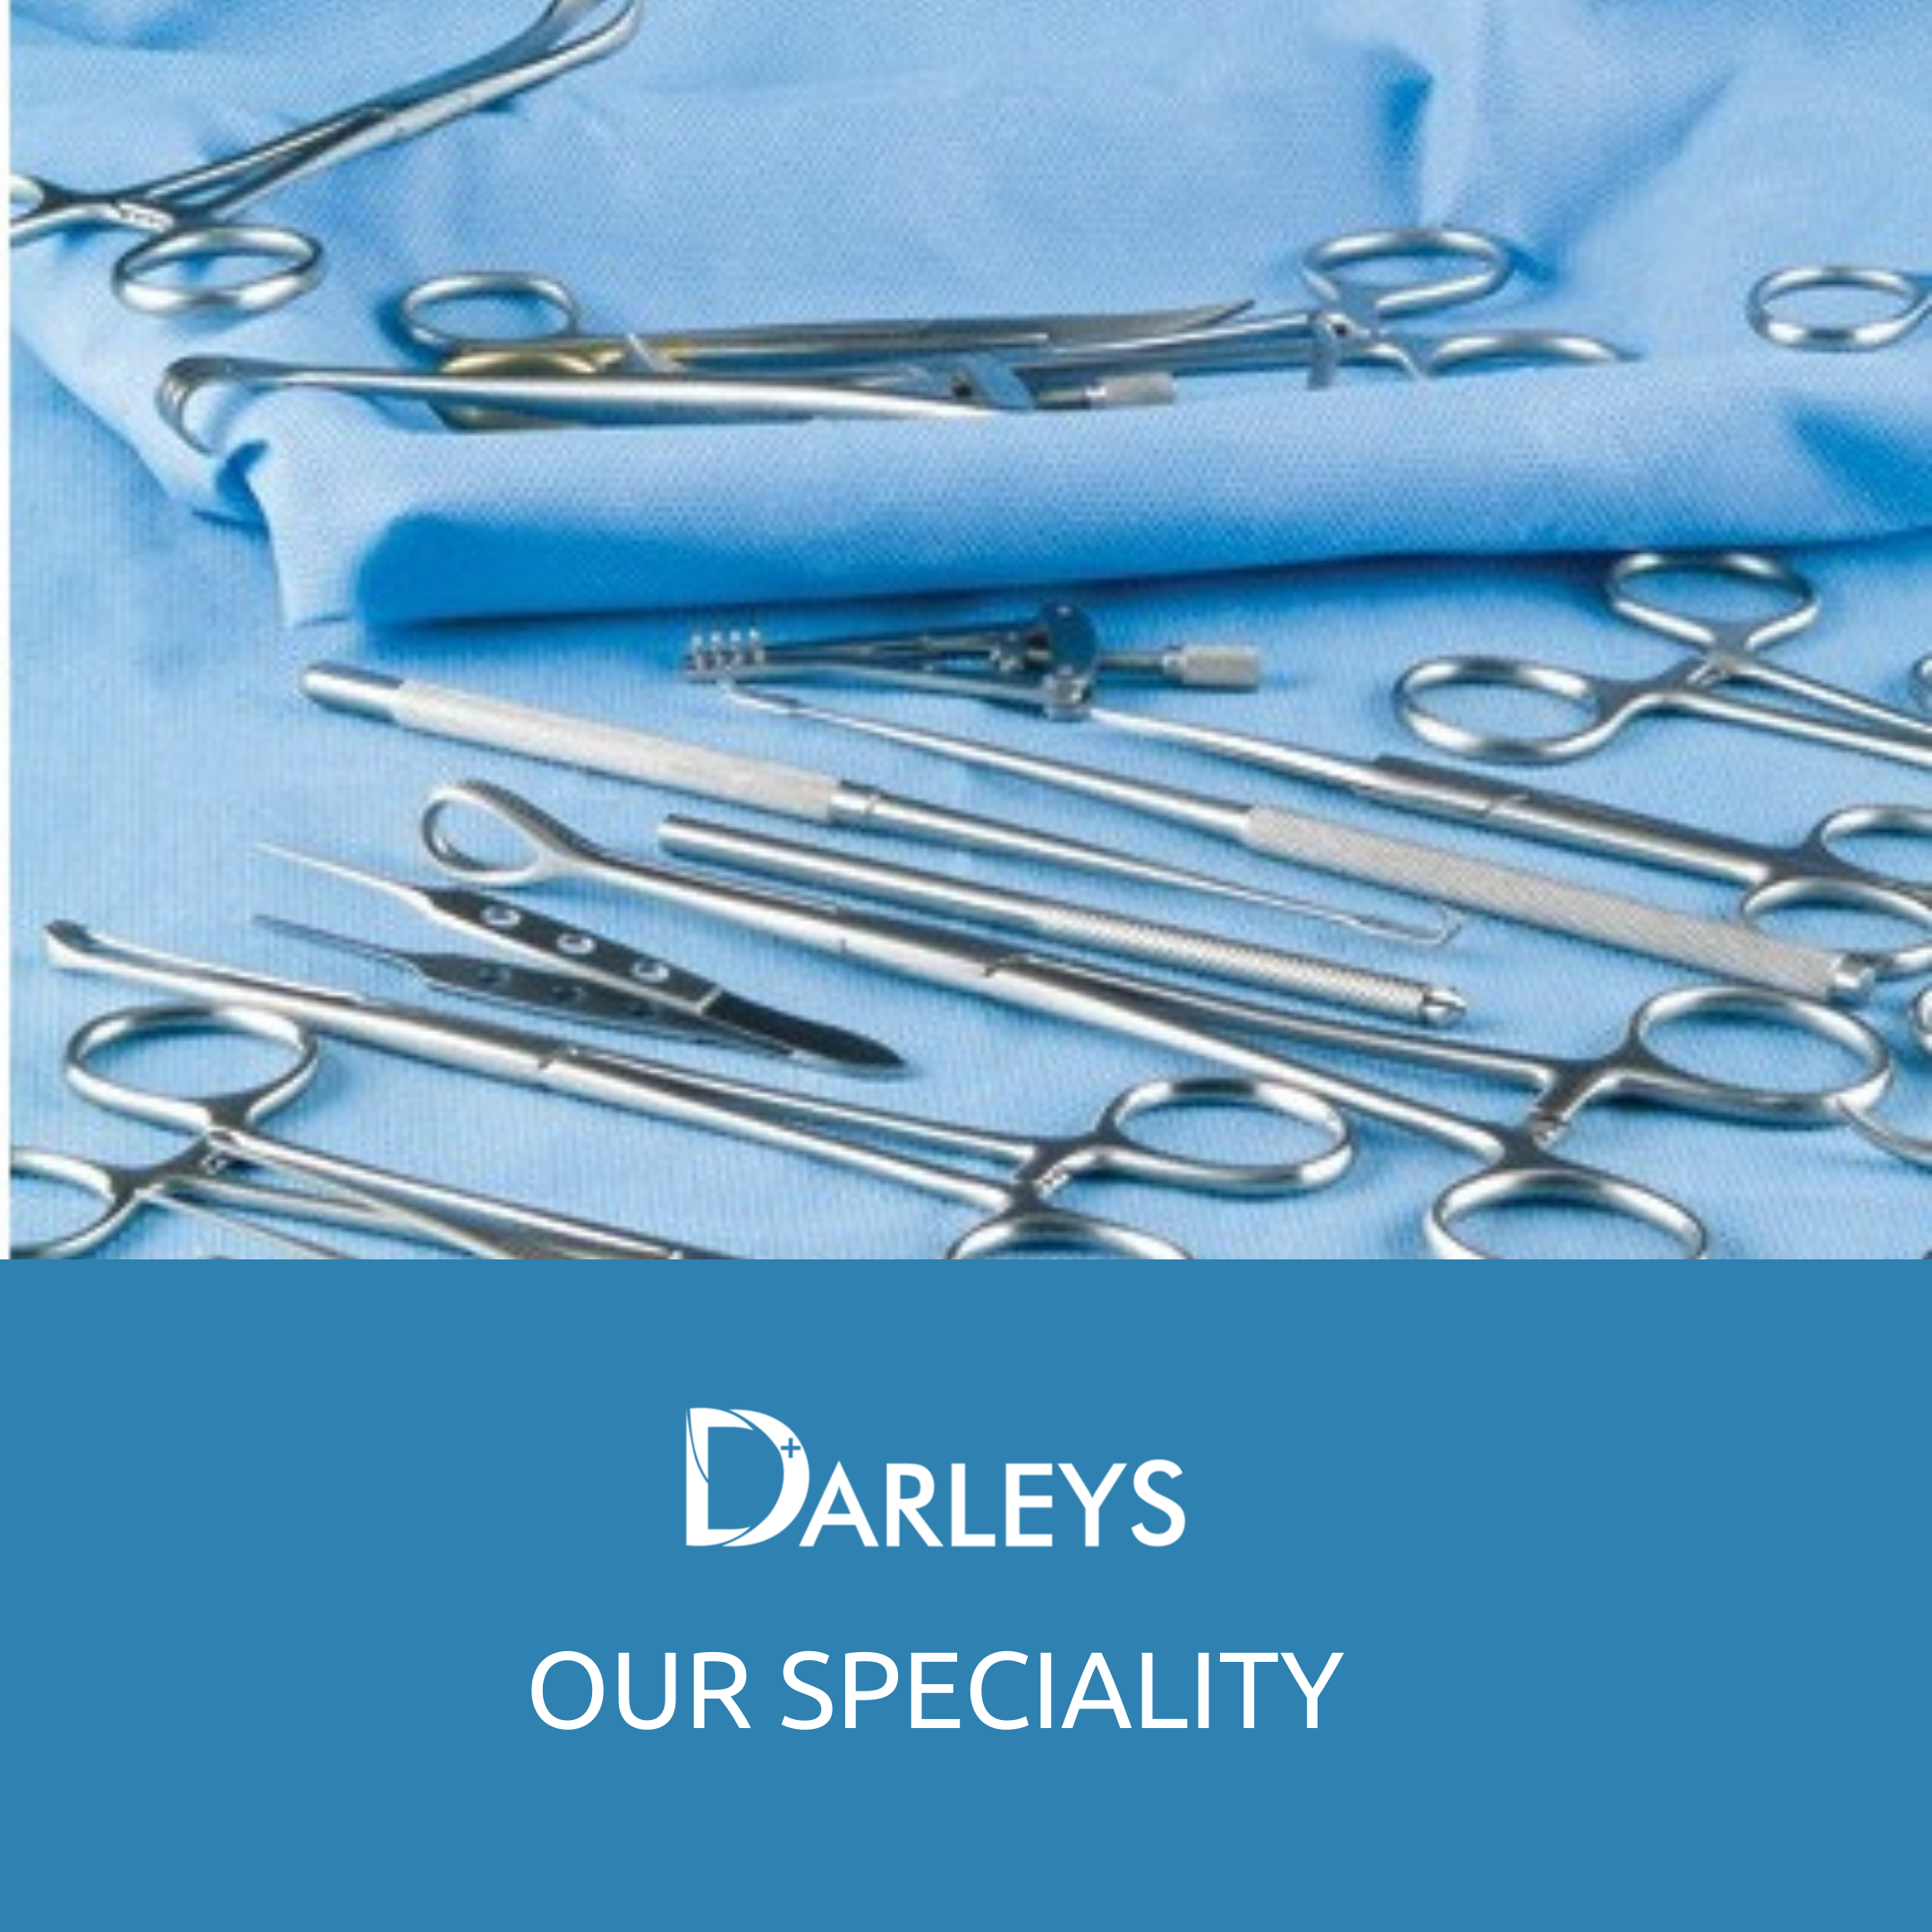 Darleys Surgical Speciality